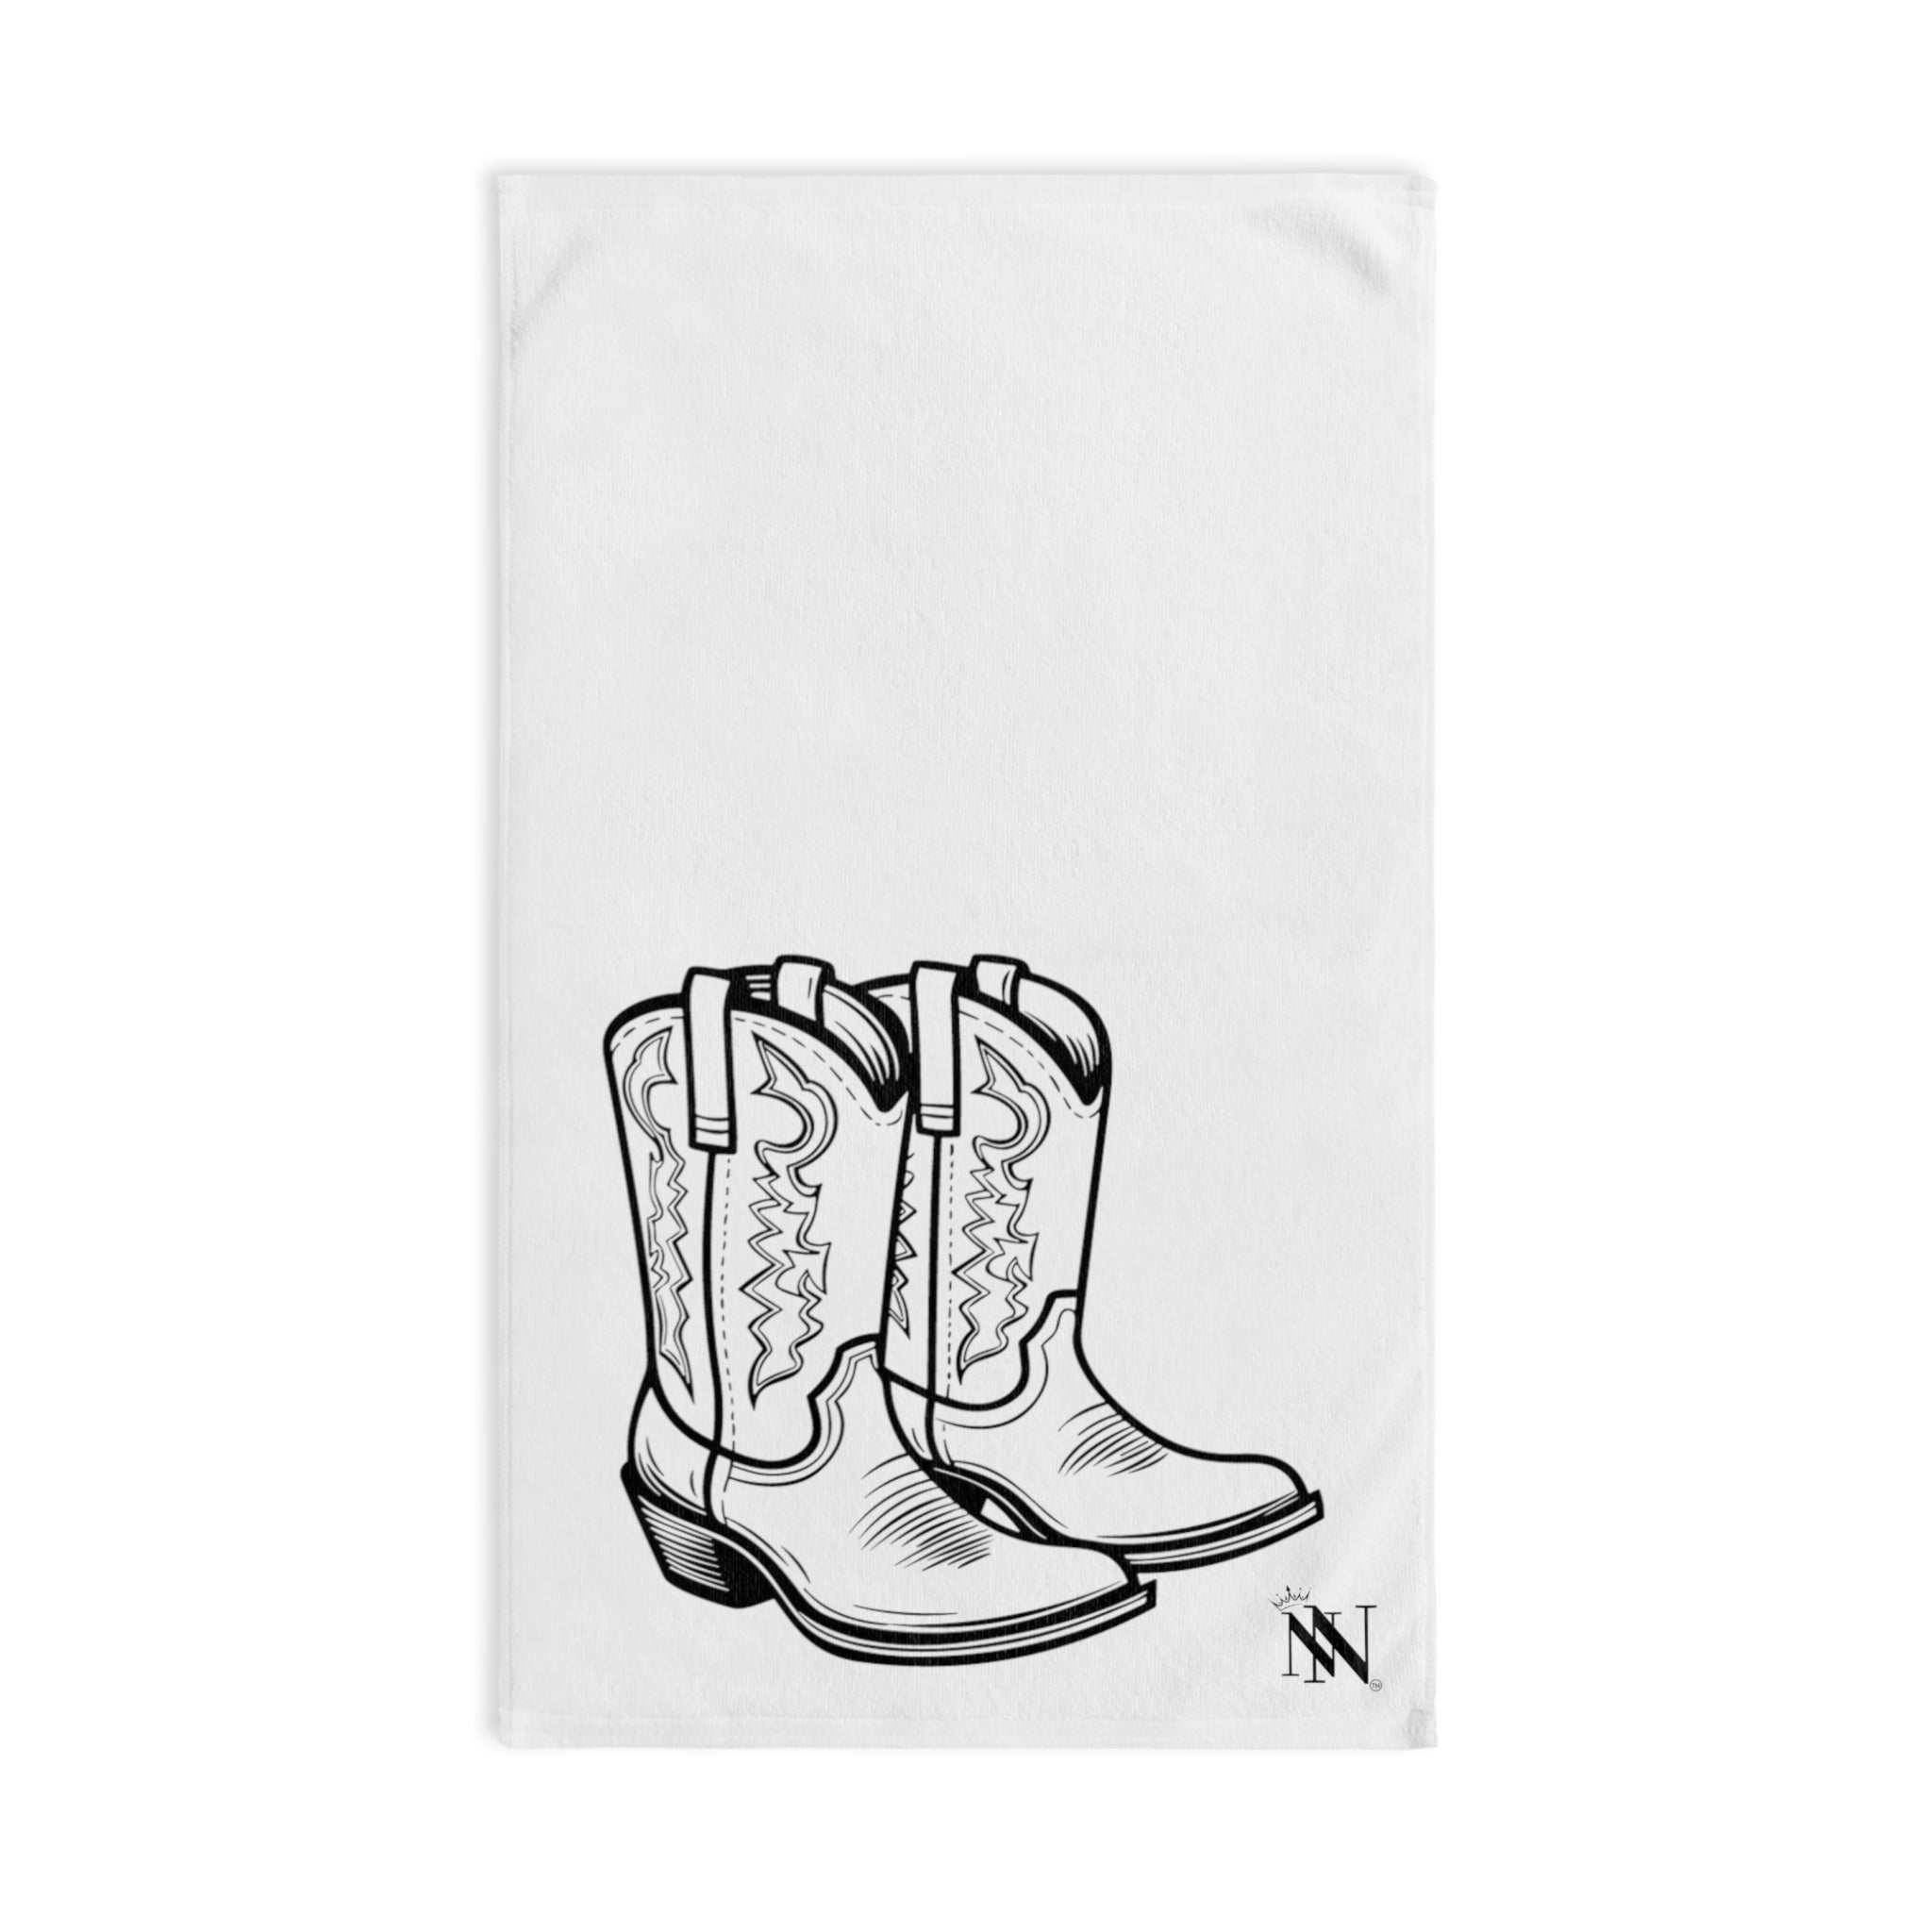 Cowboy Boots White | Funny Gifts for Men - Gifts for Him - Birthday Gifts for Men, Him, Her, Husband, Boyfriend, Girlfriend, New Couple Gifts, Fathers & Valentines Day Gifts, Christmas Gifts NECTAR NAPKINS